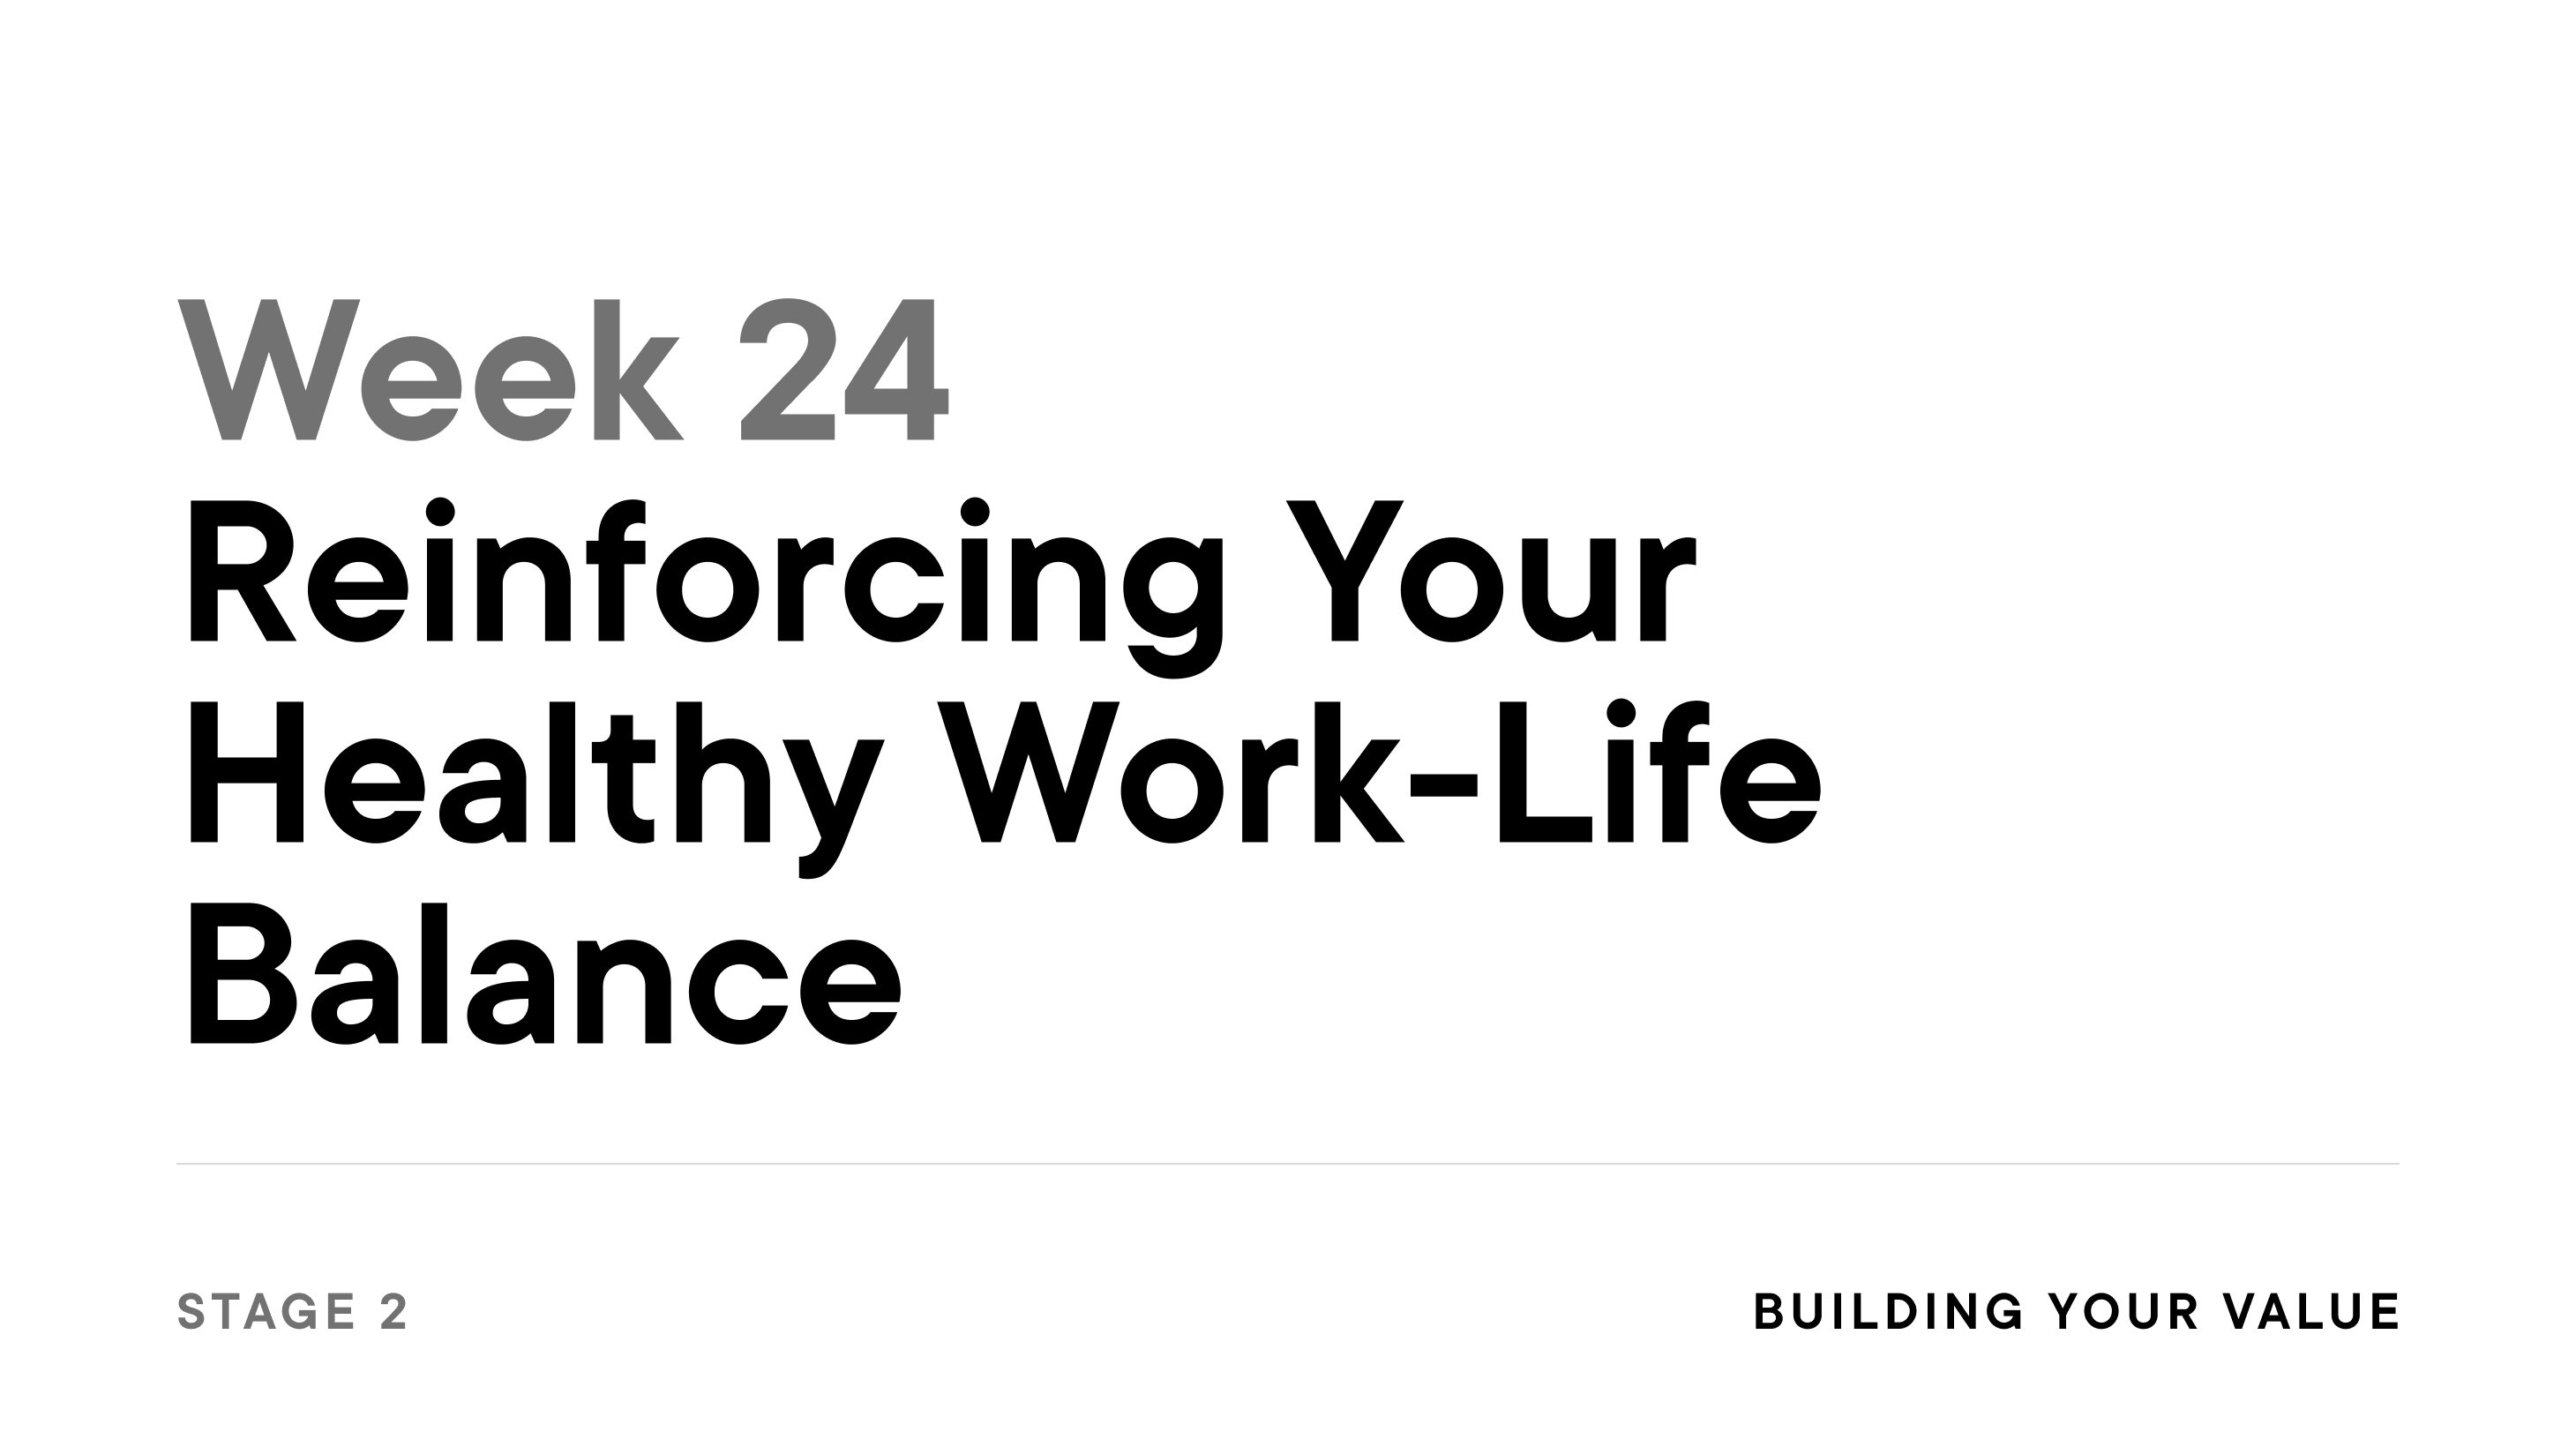 Week 24: Reinforcing Your Healthy Work-Life Balance